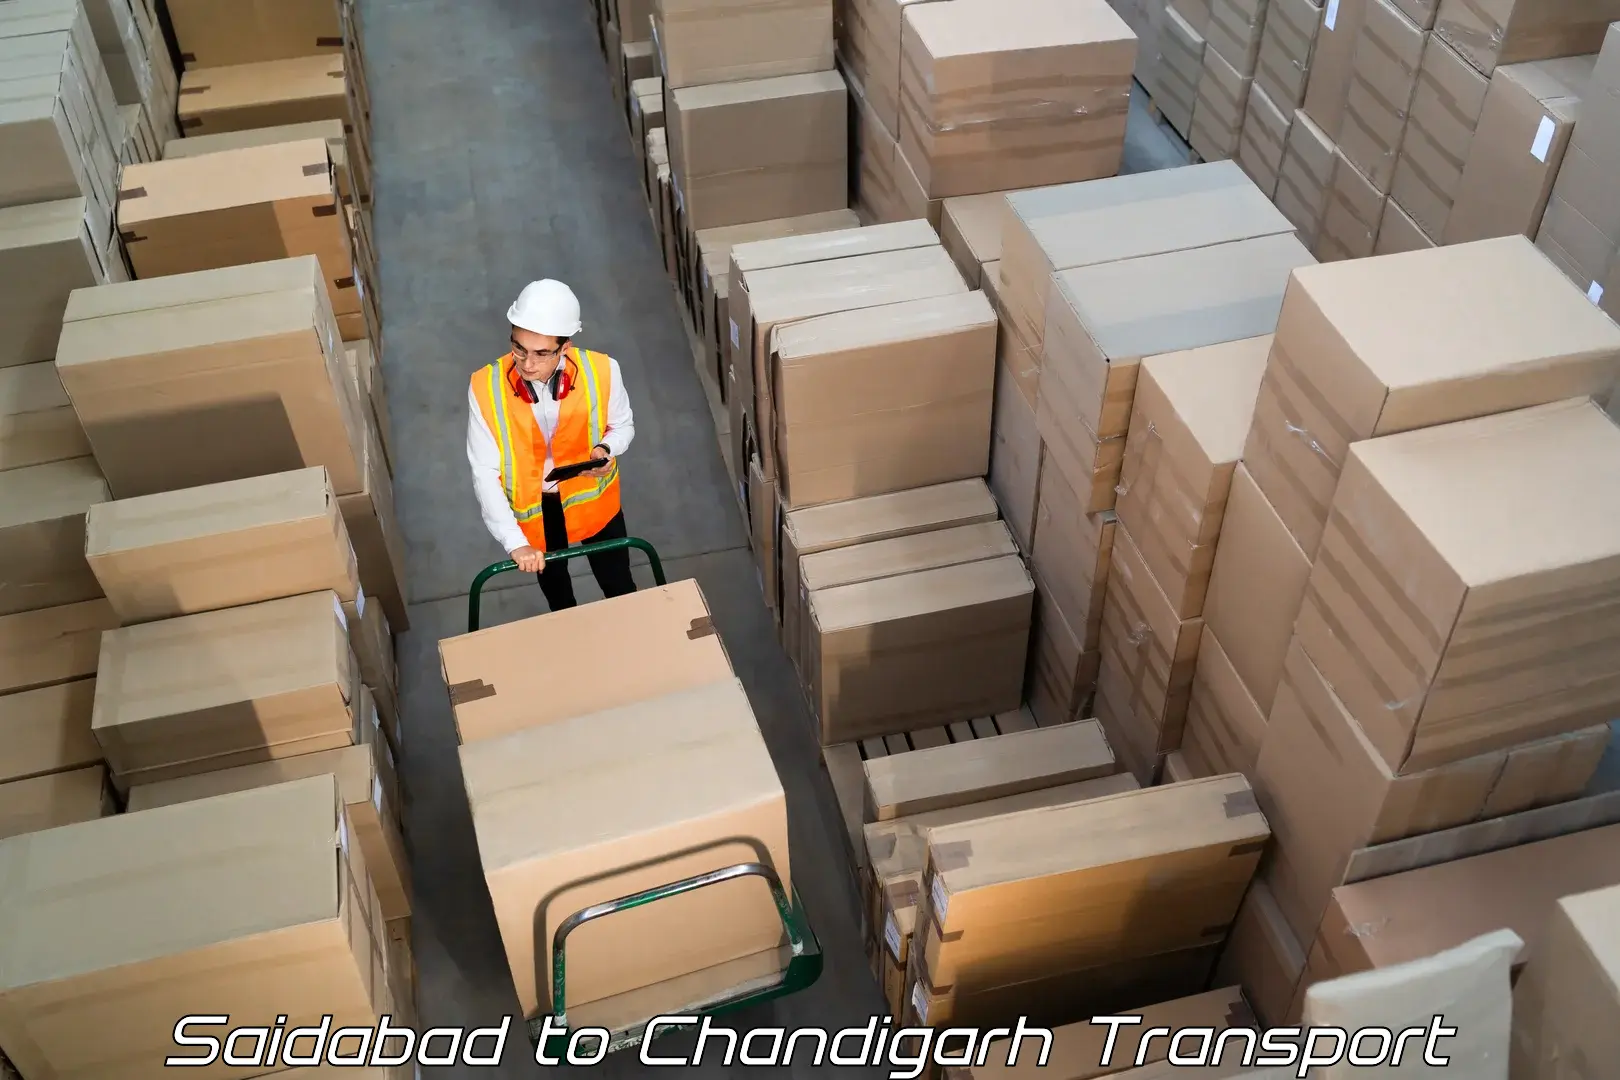 Goods delivery service Saidabad to Chandigarh